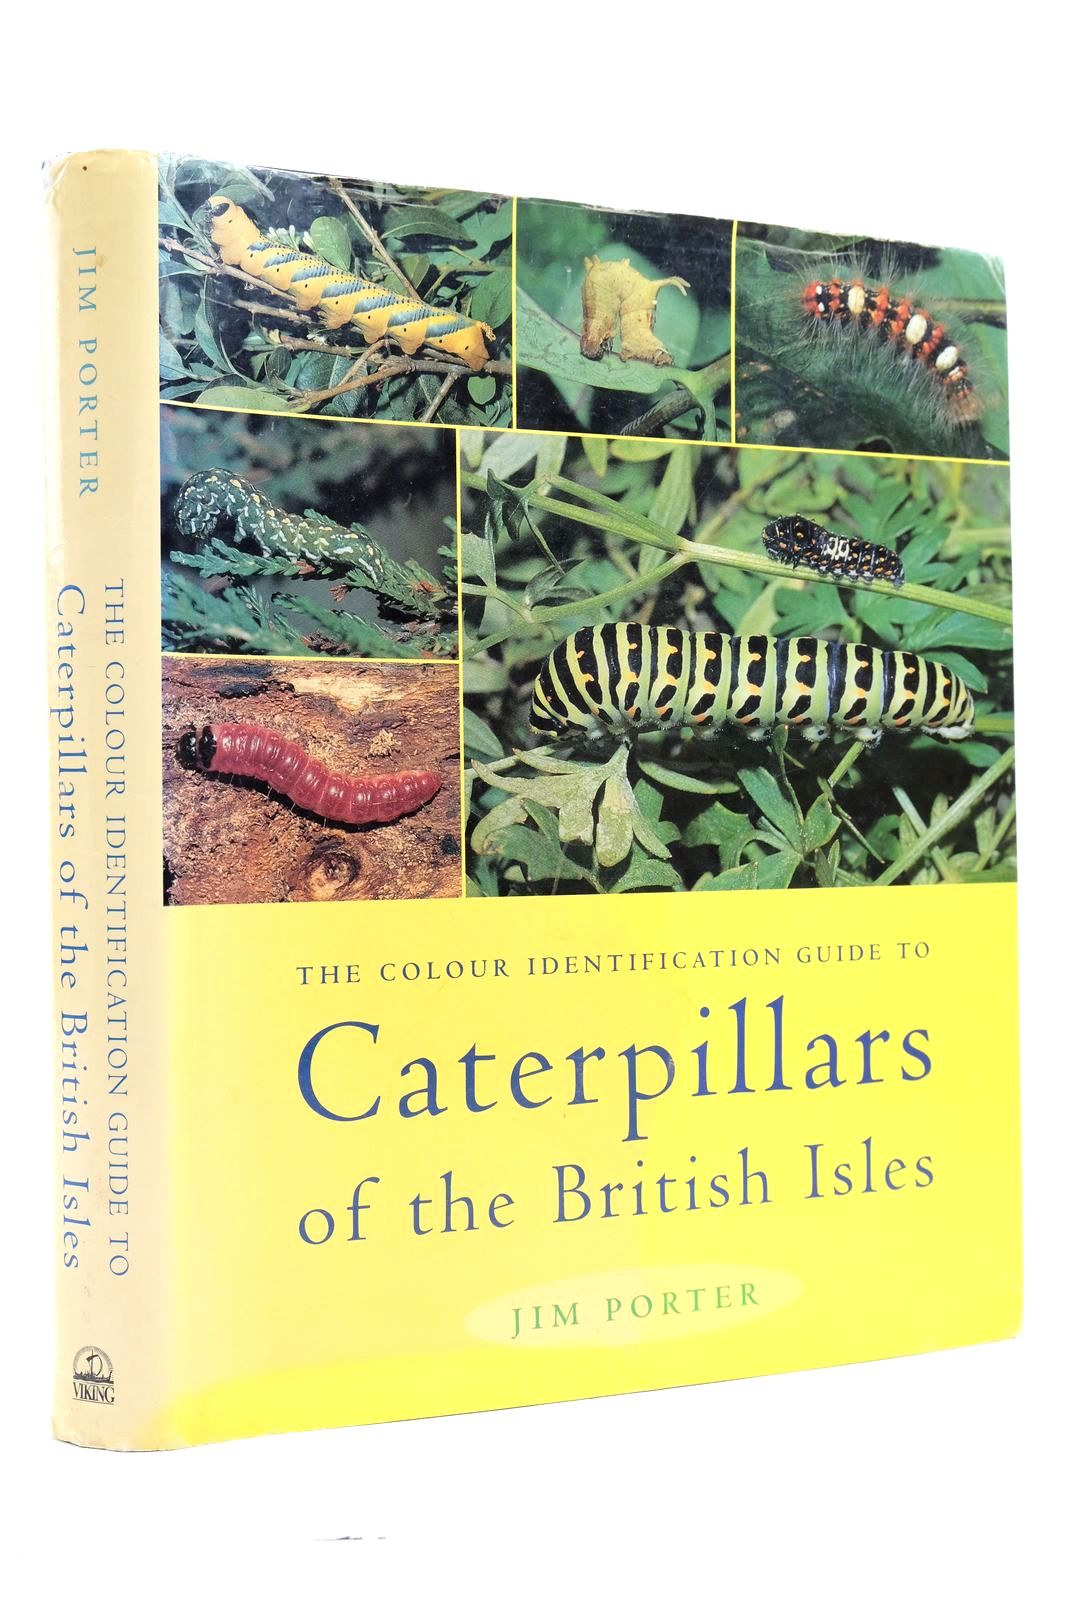 Photo of THE COLOUR IDENTIFICATION GUIDE TO CATERPILLARS OF THE BRITISH ISLES (MACROLEPIDOPTERA) written by Porter, Jim published by Viking (STOCK CODE: 2139685)  for sale by Stella & Rose's Books